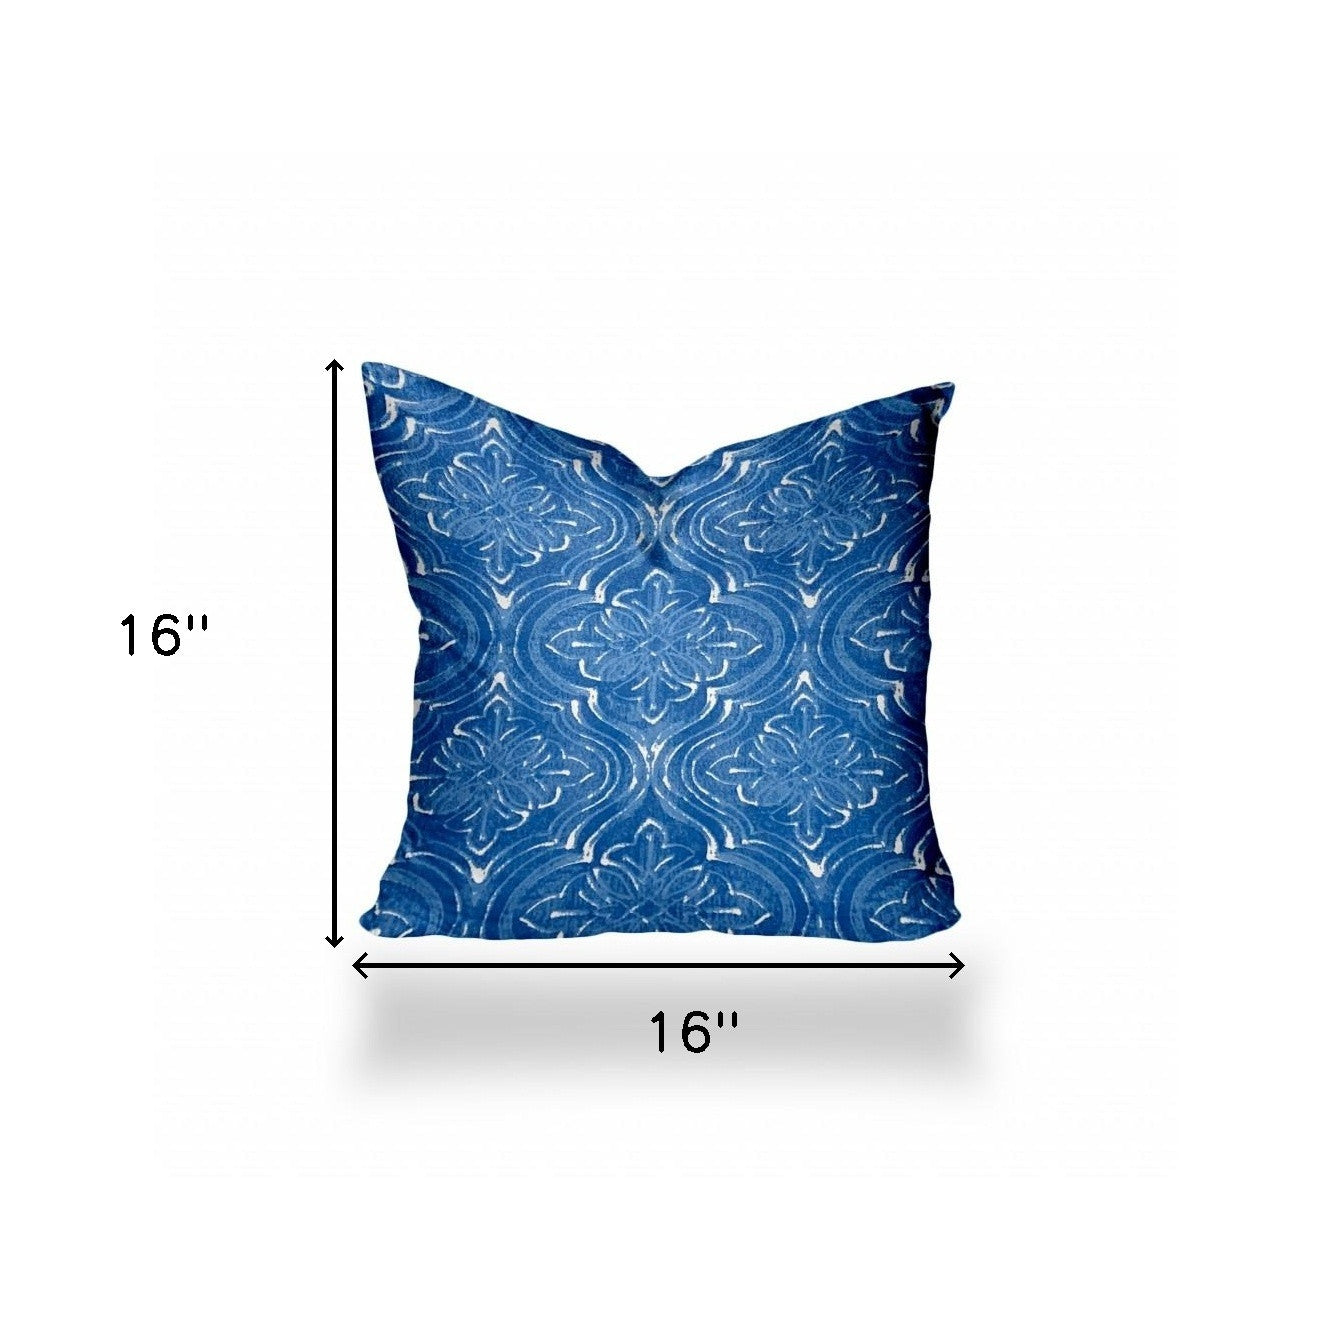 16" X 16" Blue And White Zippered Ikat Throw Indoor Outdoor Pillow Cover